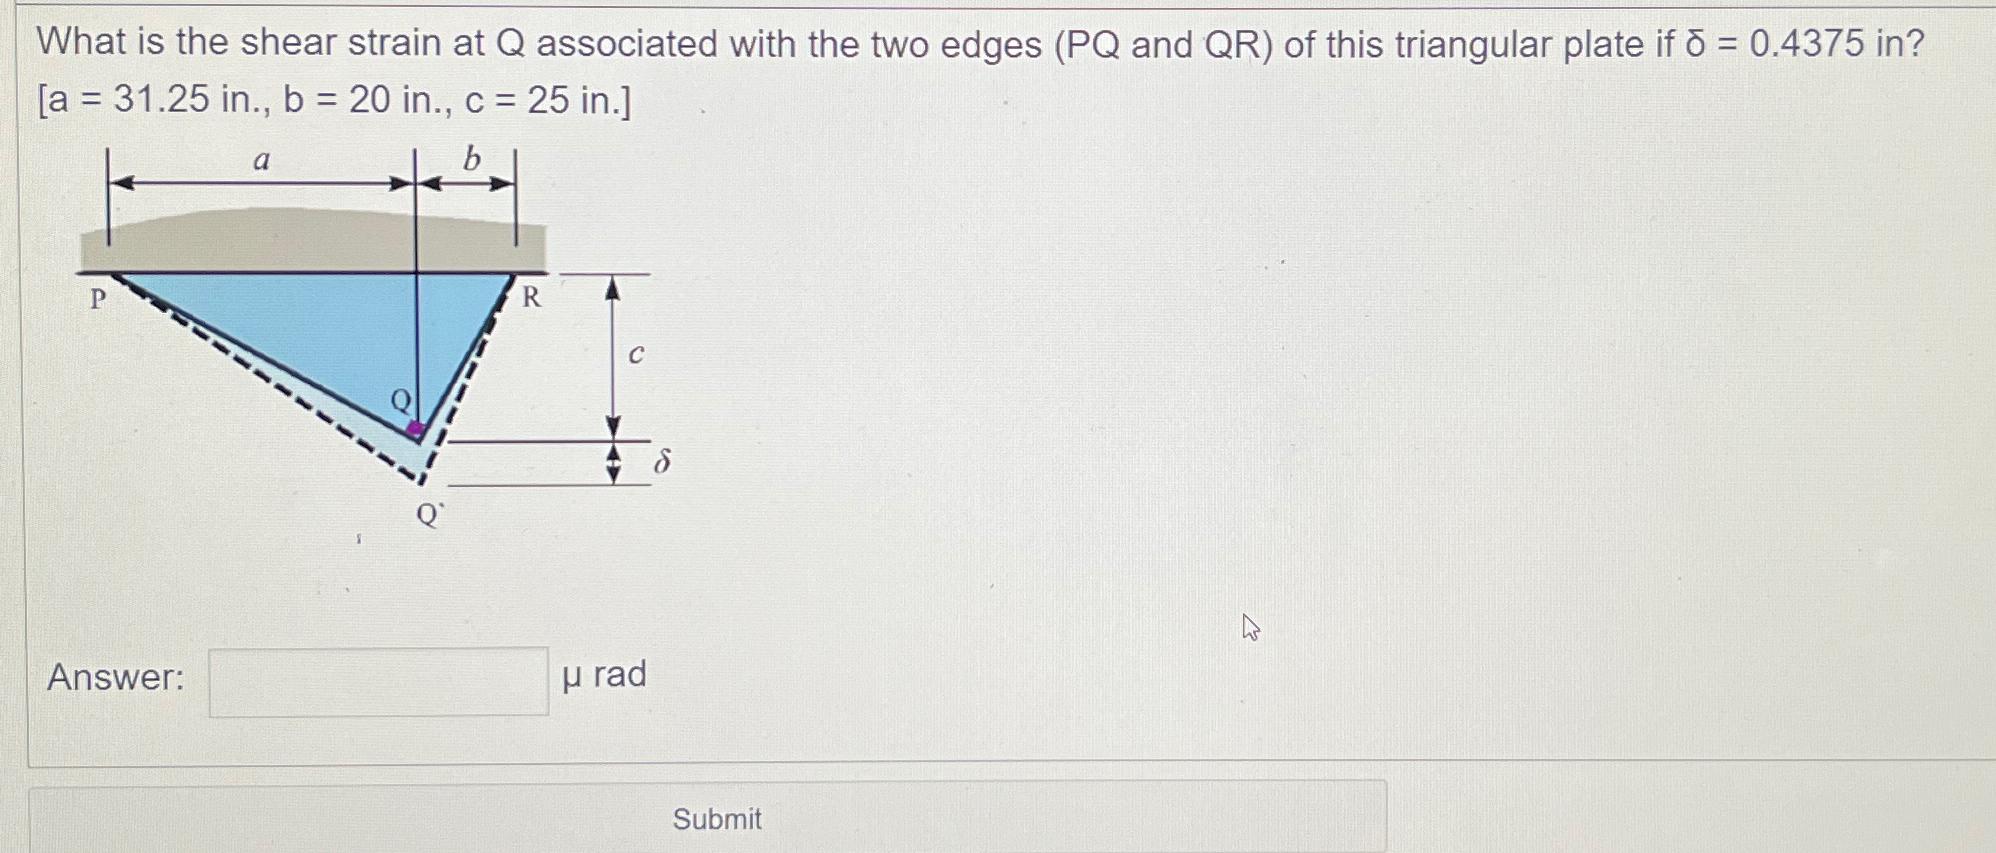 What is the shear strain at Q associated with the two edges (PQ and QR) of this triangular plate if = 0.4375